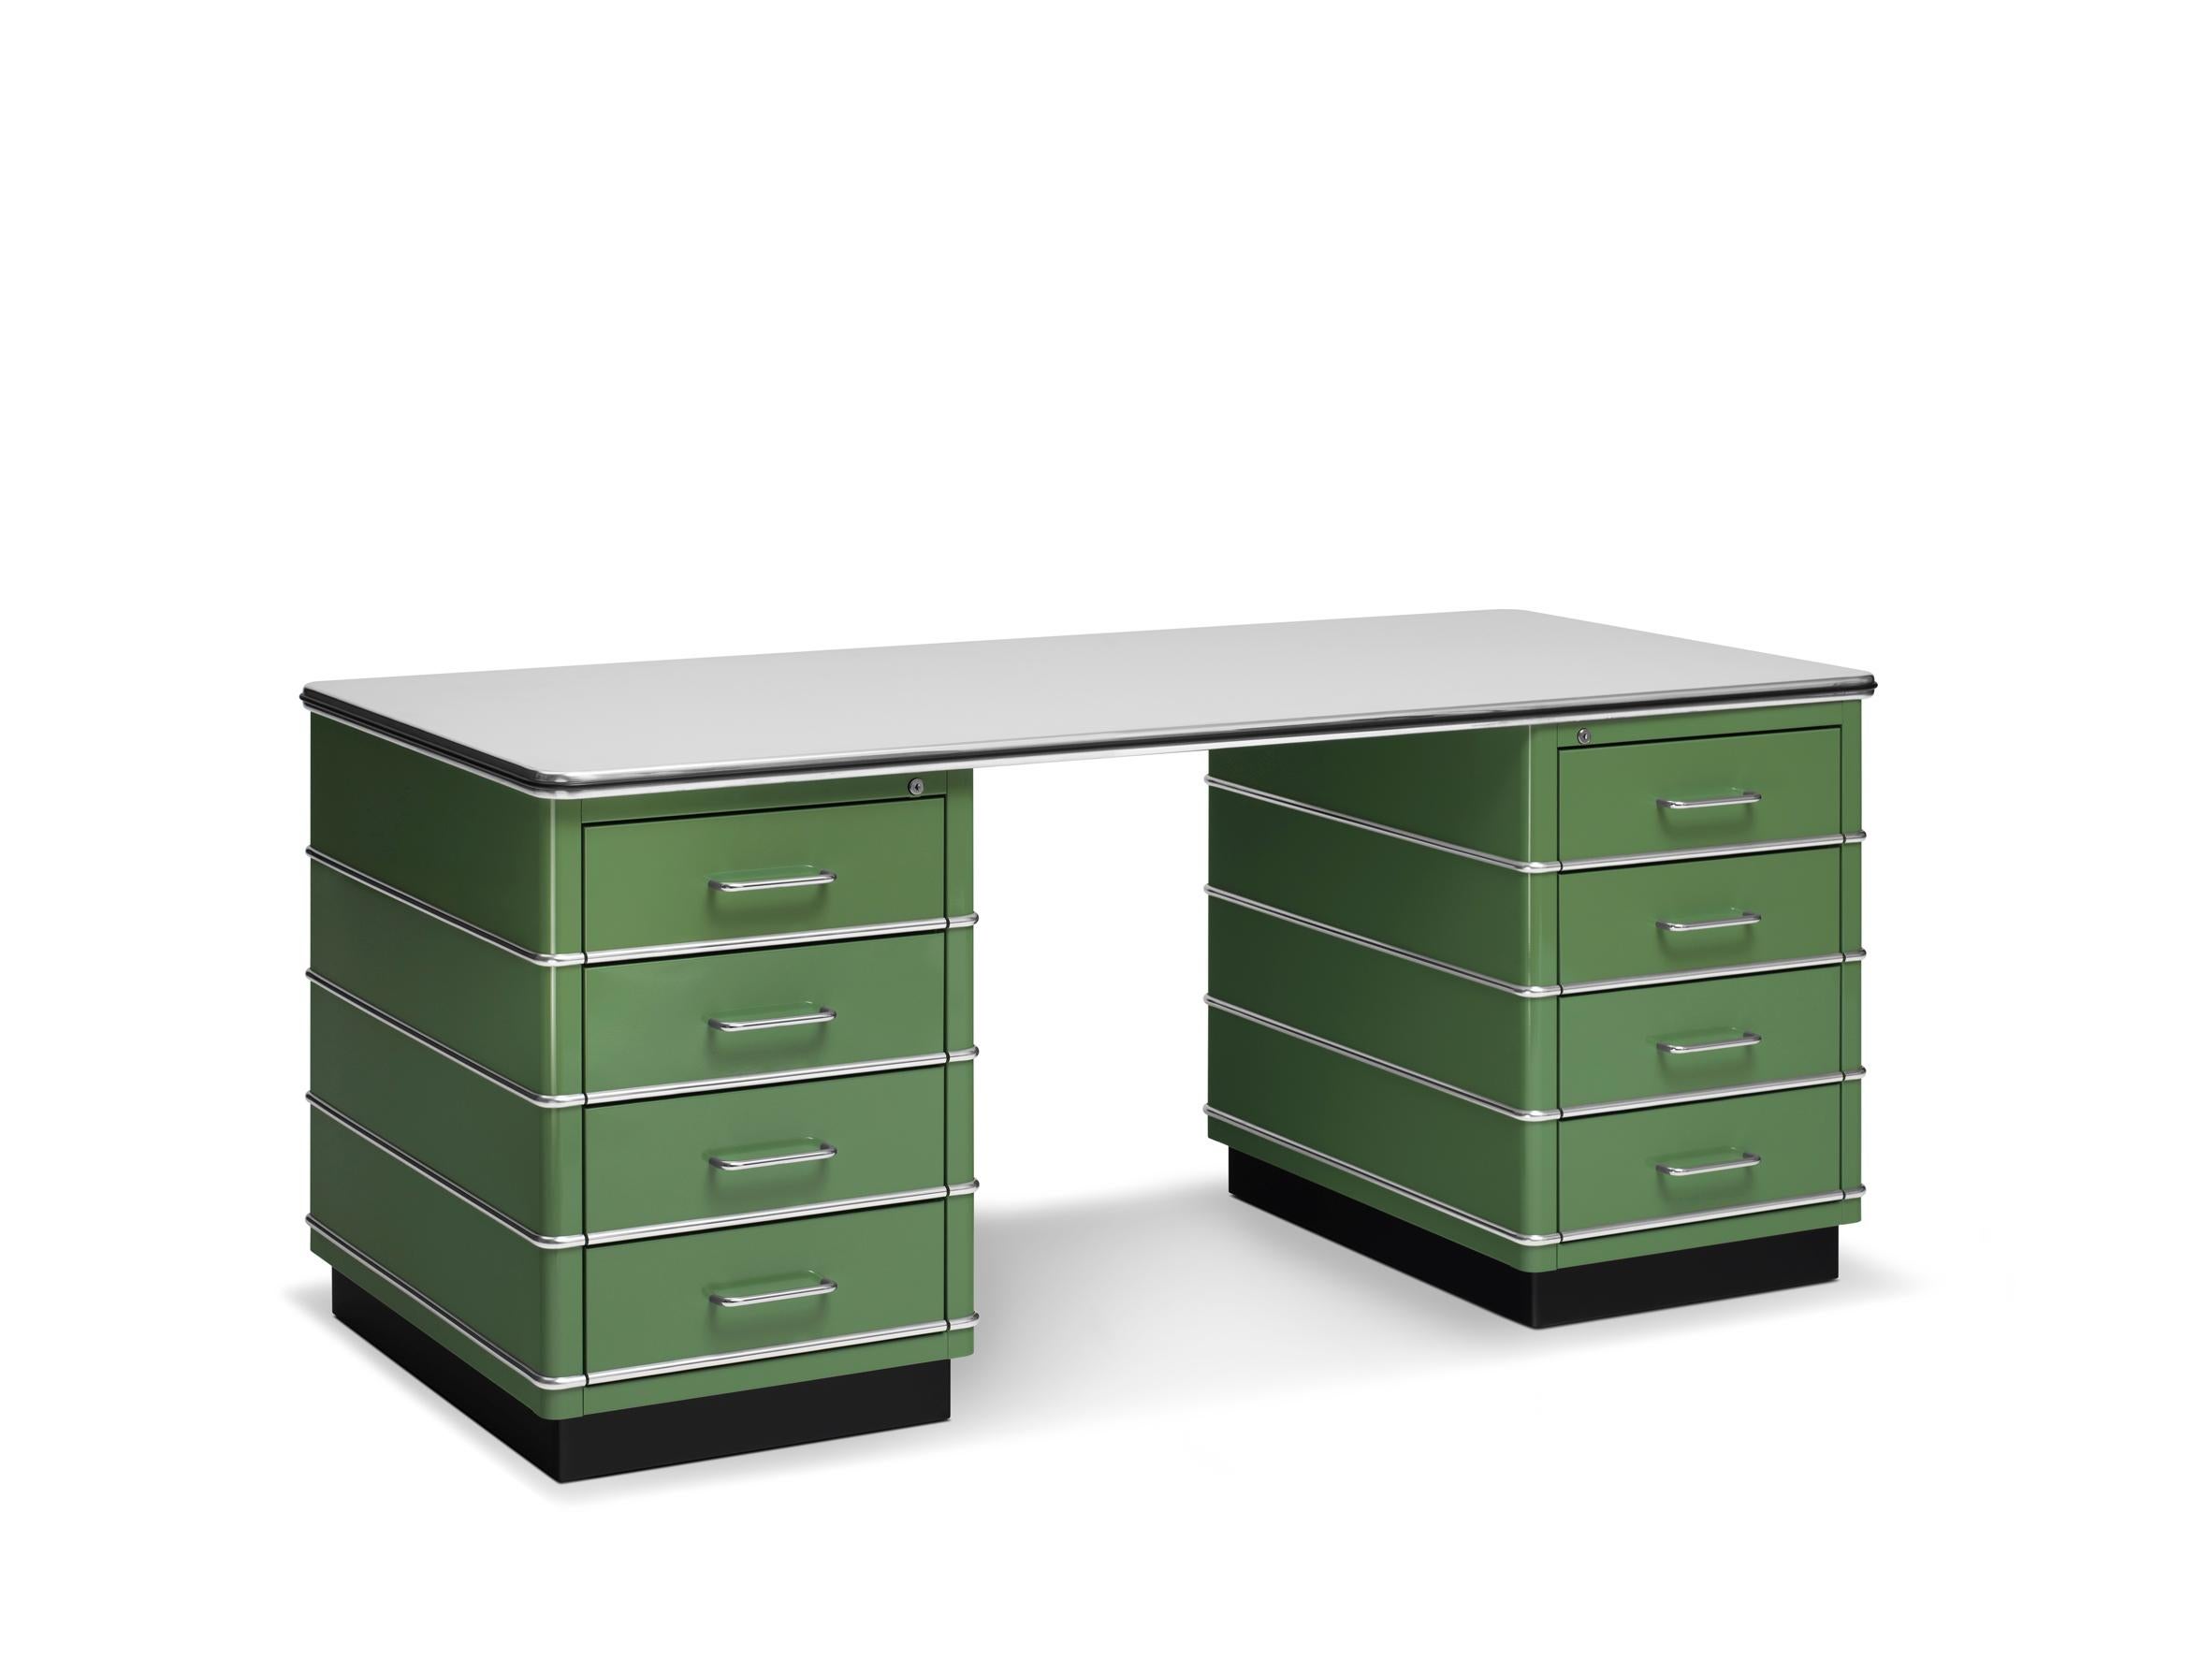 Müller Desk TB229 in Metal 'Reseda green'. Germany, current production.

Beautiful classic looking Müller Desk TB229 showing great craftmanship and quality.

The CLASSIC LINE models present themselves in a very distinctive way – elegant, functional